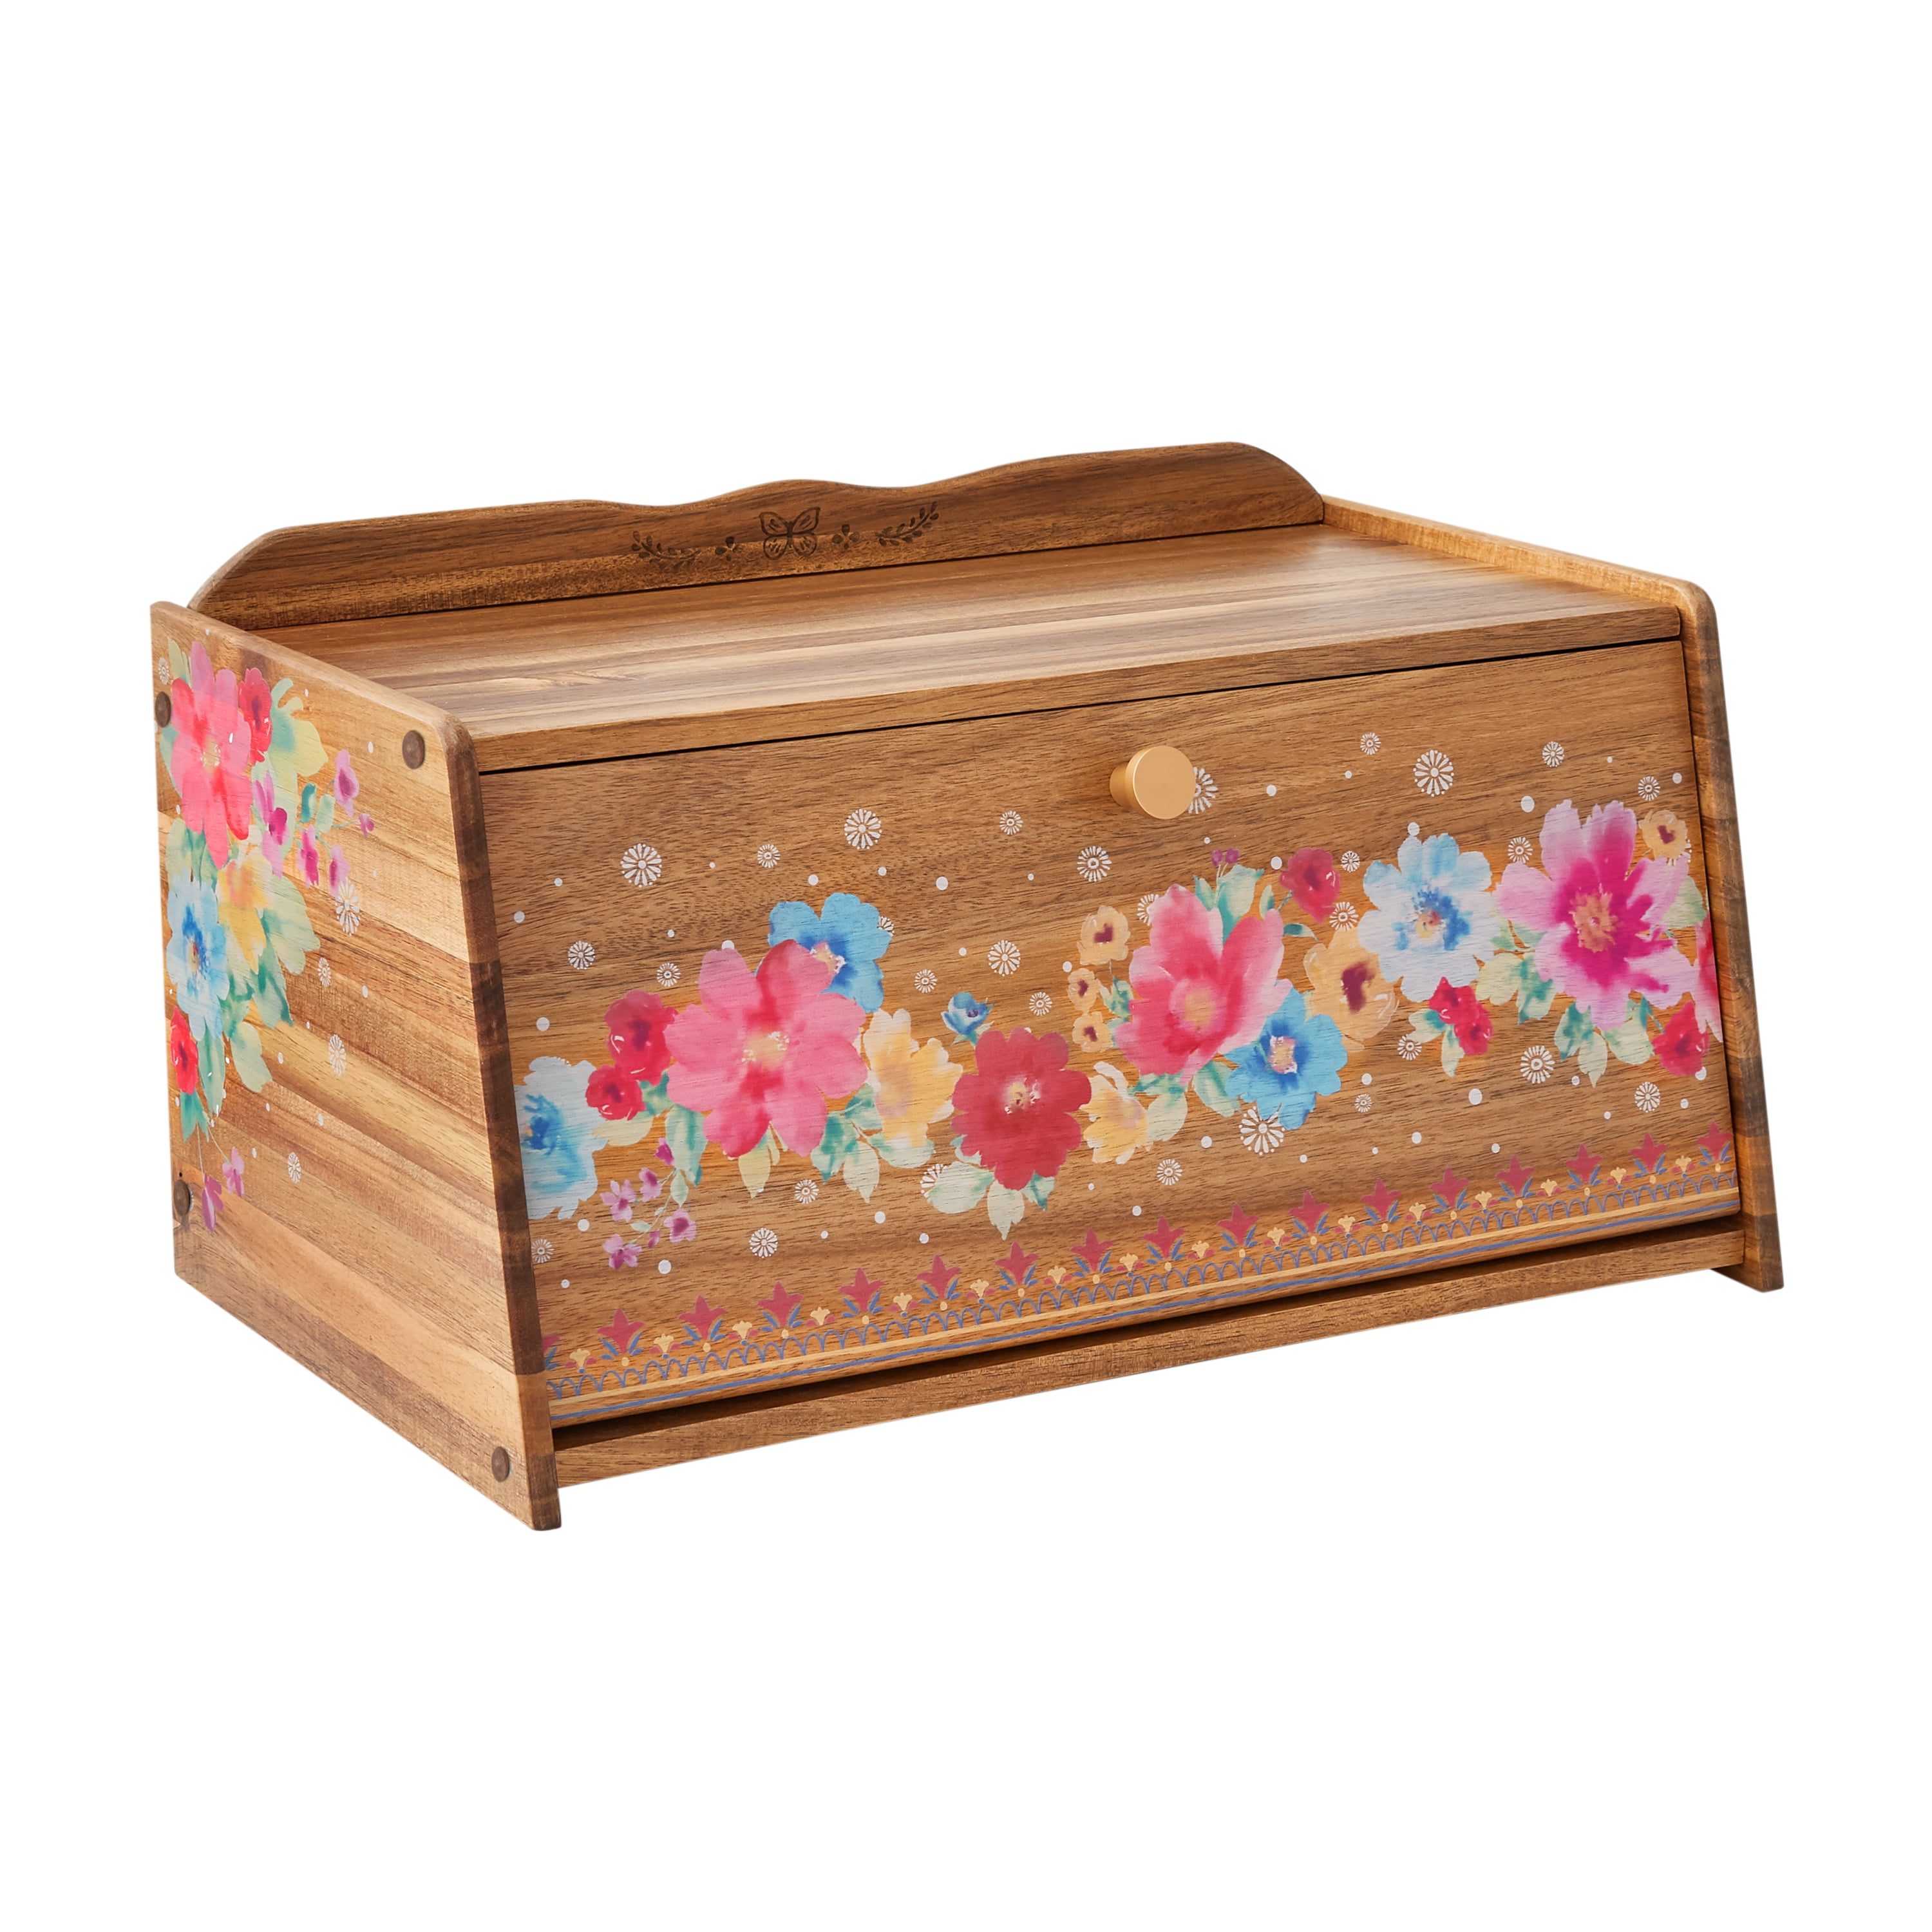 PIONEER WOMAN RECIPE BOX W/ CARDS BREEZY BLOSSOM ACACIA WOOD TURQUOISE DOTS 